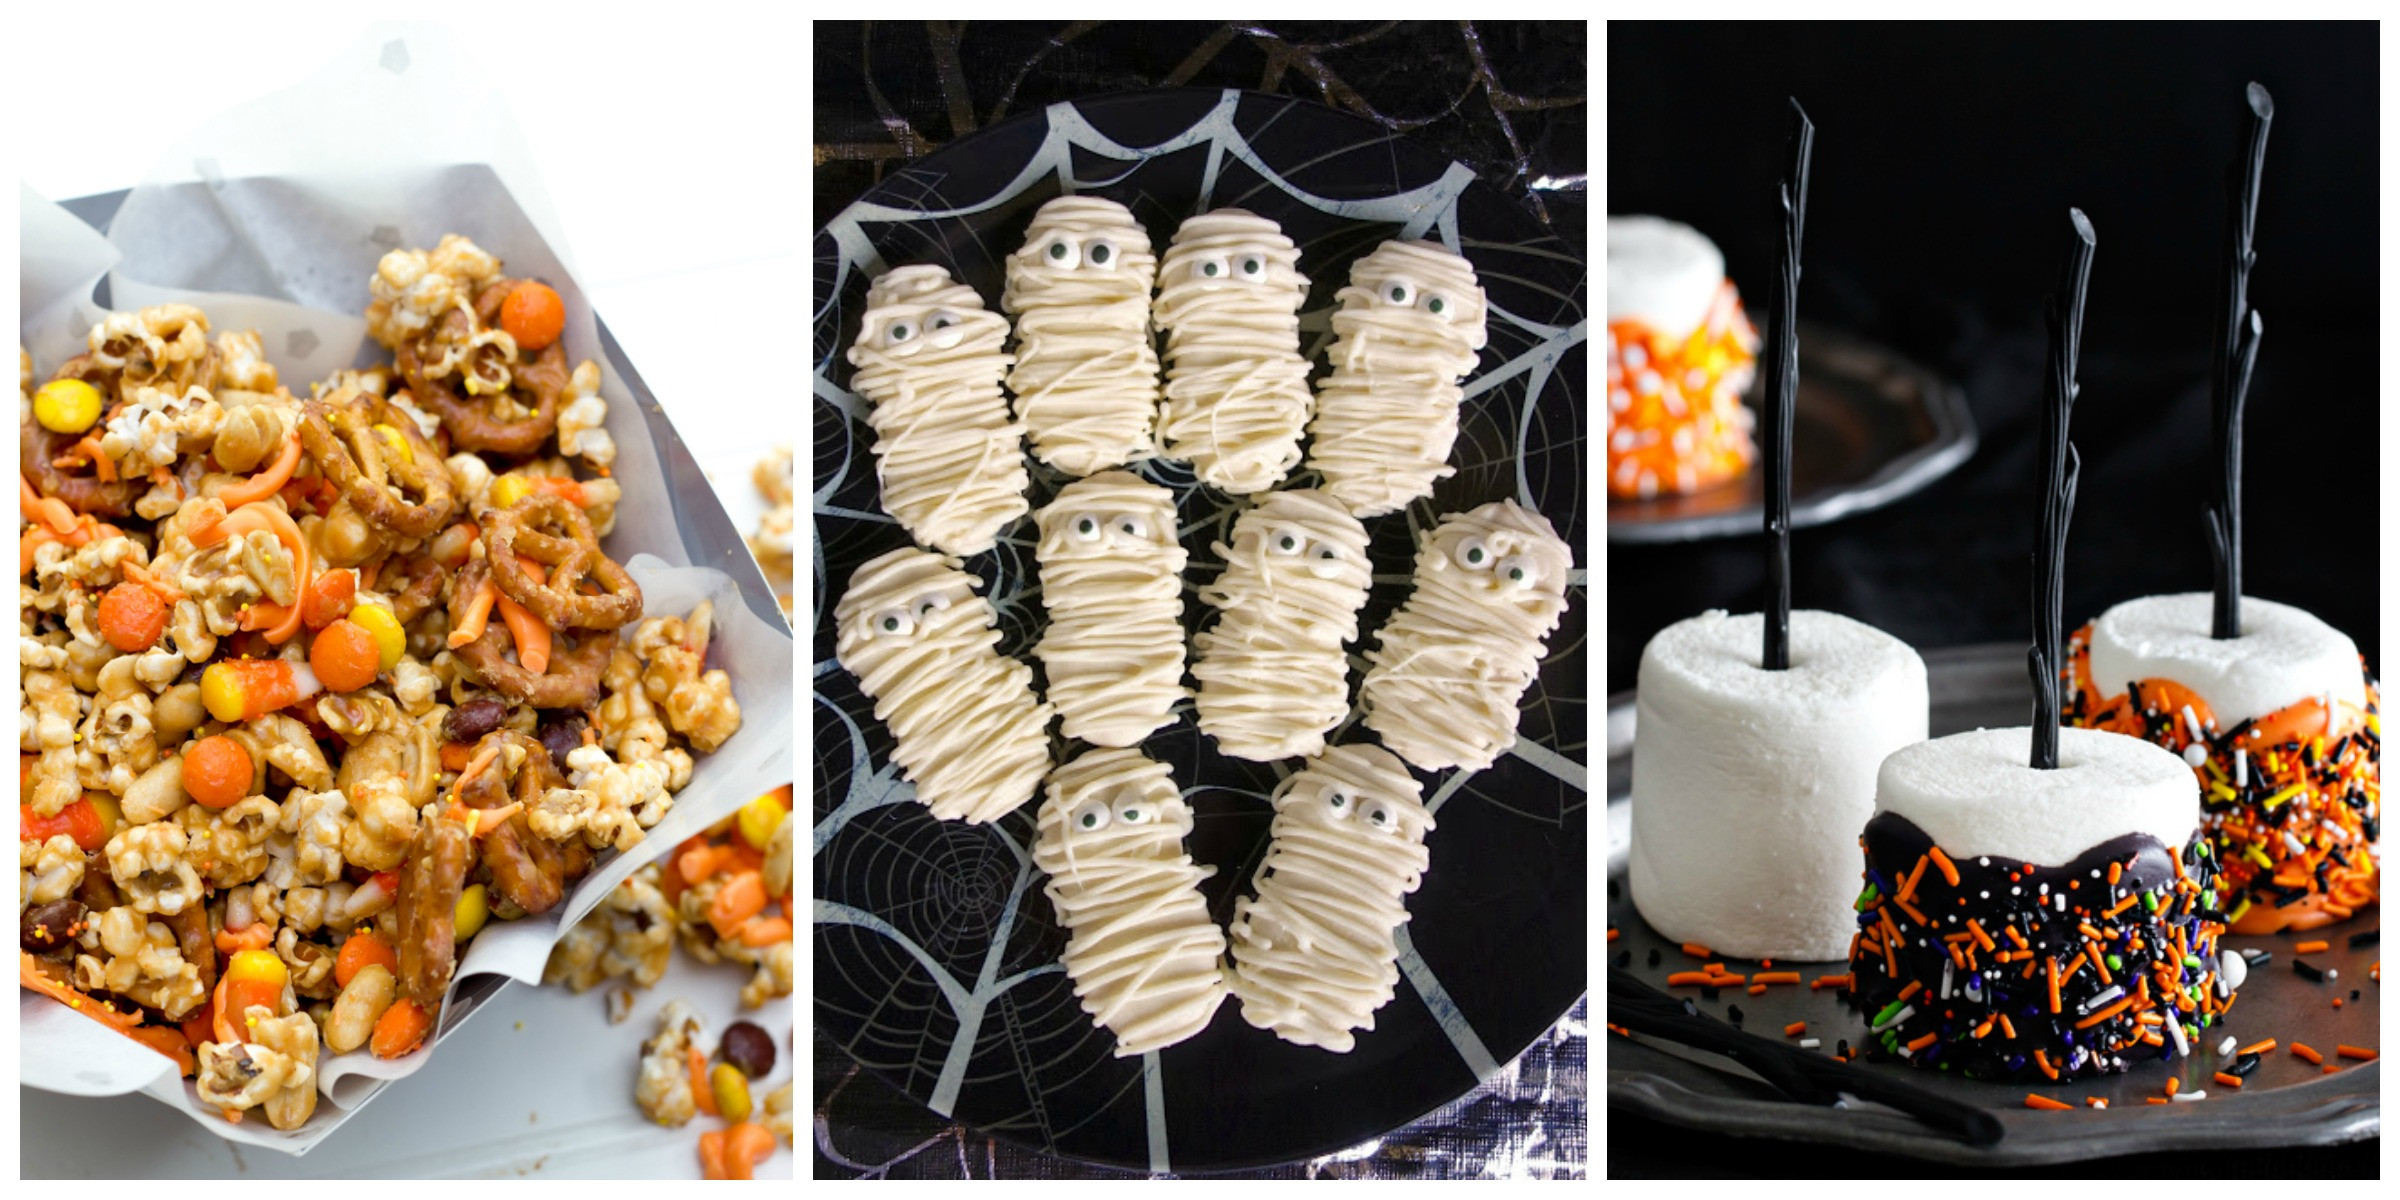 Easy Halloween Party Food Ideas
 22 Easy Halloween Party Food Ideas Cute Recipes for